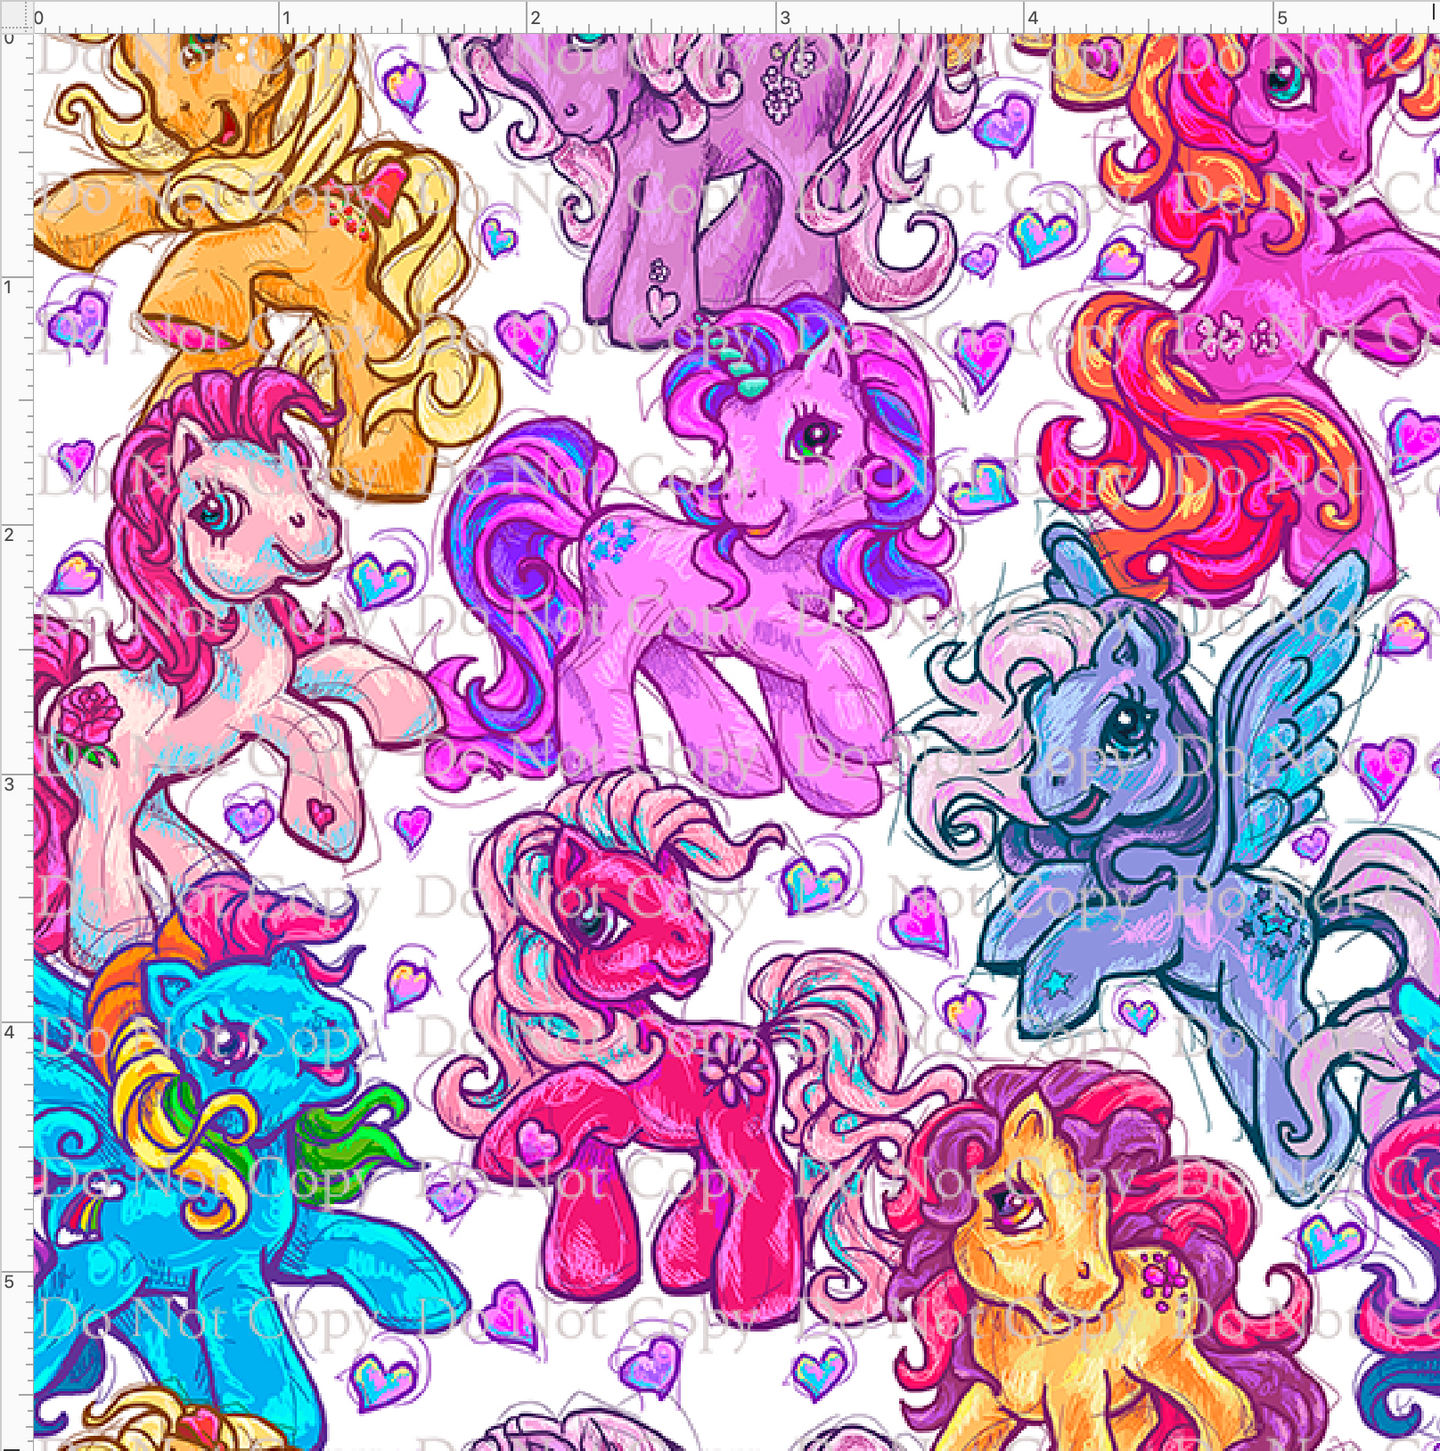 CATALOG - PREORDER R43 - 80s Throwback - Ponies - Main - White - SMALL SCALE 6x6